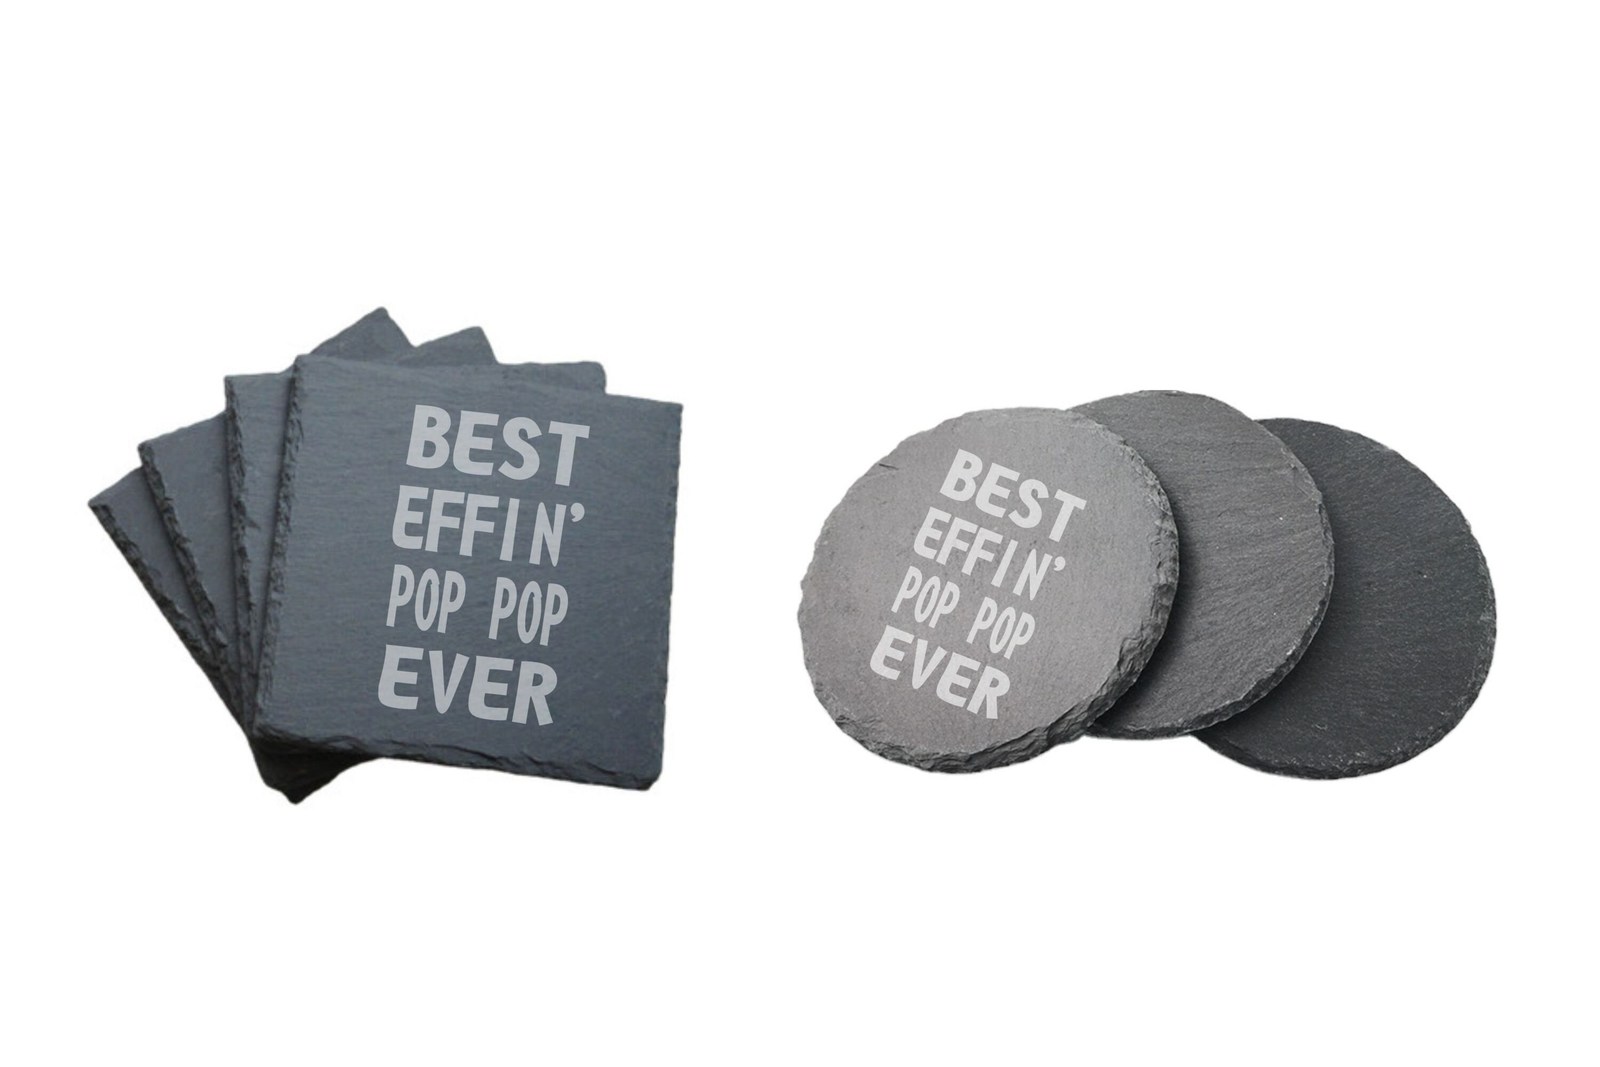 Primary image for Funny Grandpa Gifts Best Effin Pop Pop Ever Engraved Slate Coasters Set of 4